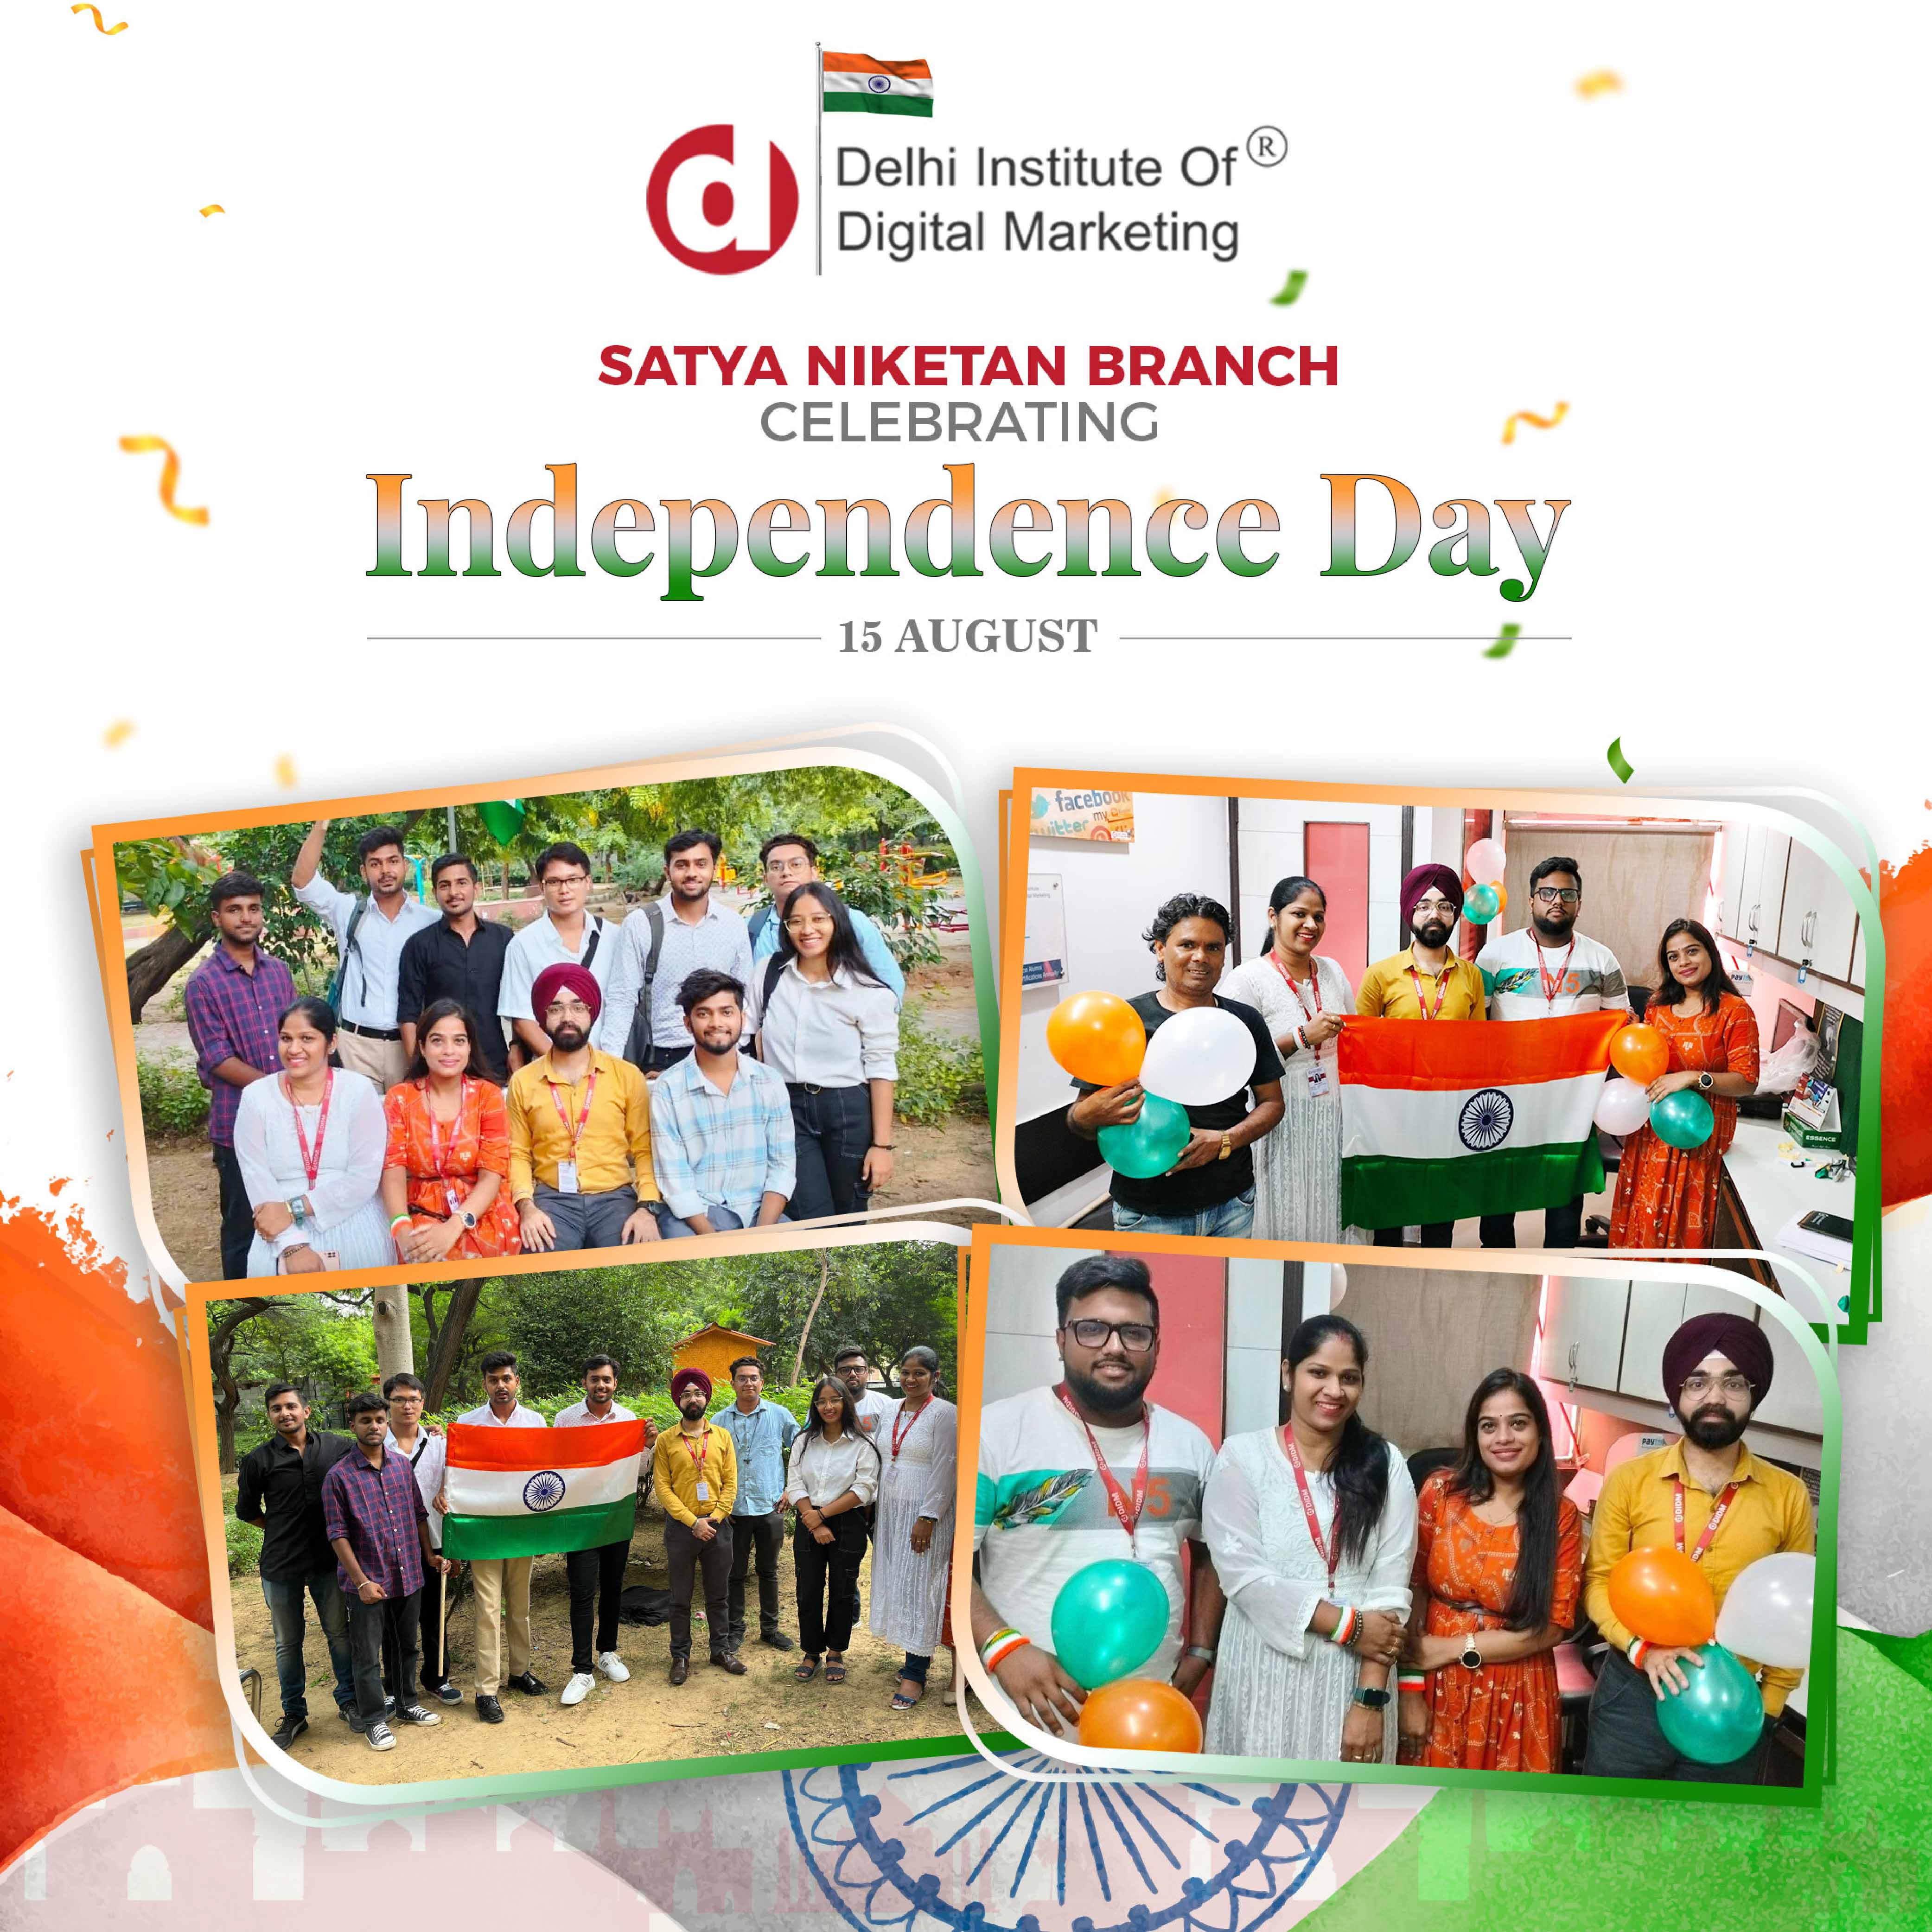 DIDM Satyaniketan Branch is celebrating its 77th Independence Day